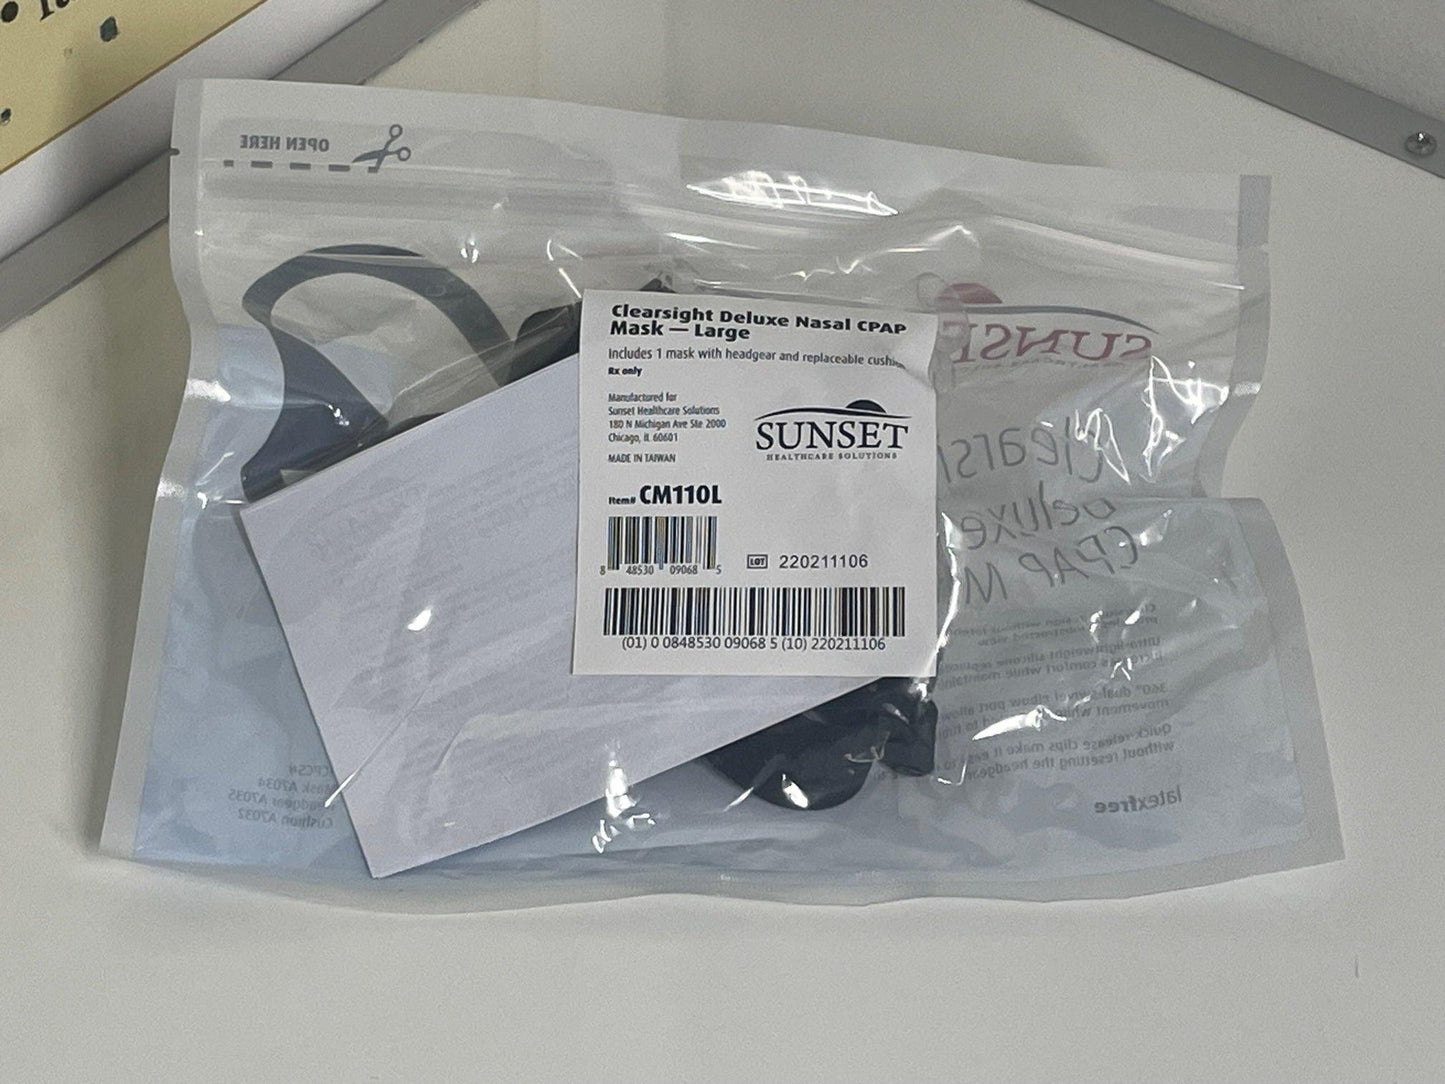 NEW Large Sunset Healthcare Clearsight Deluxe Nasal CPAP Mask CM110L - MBR Medicals